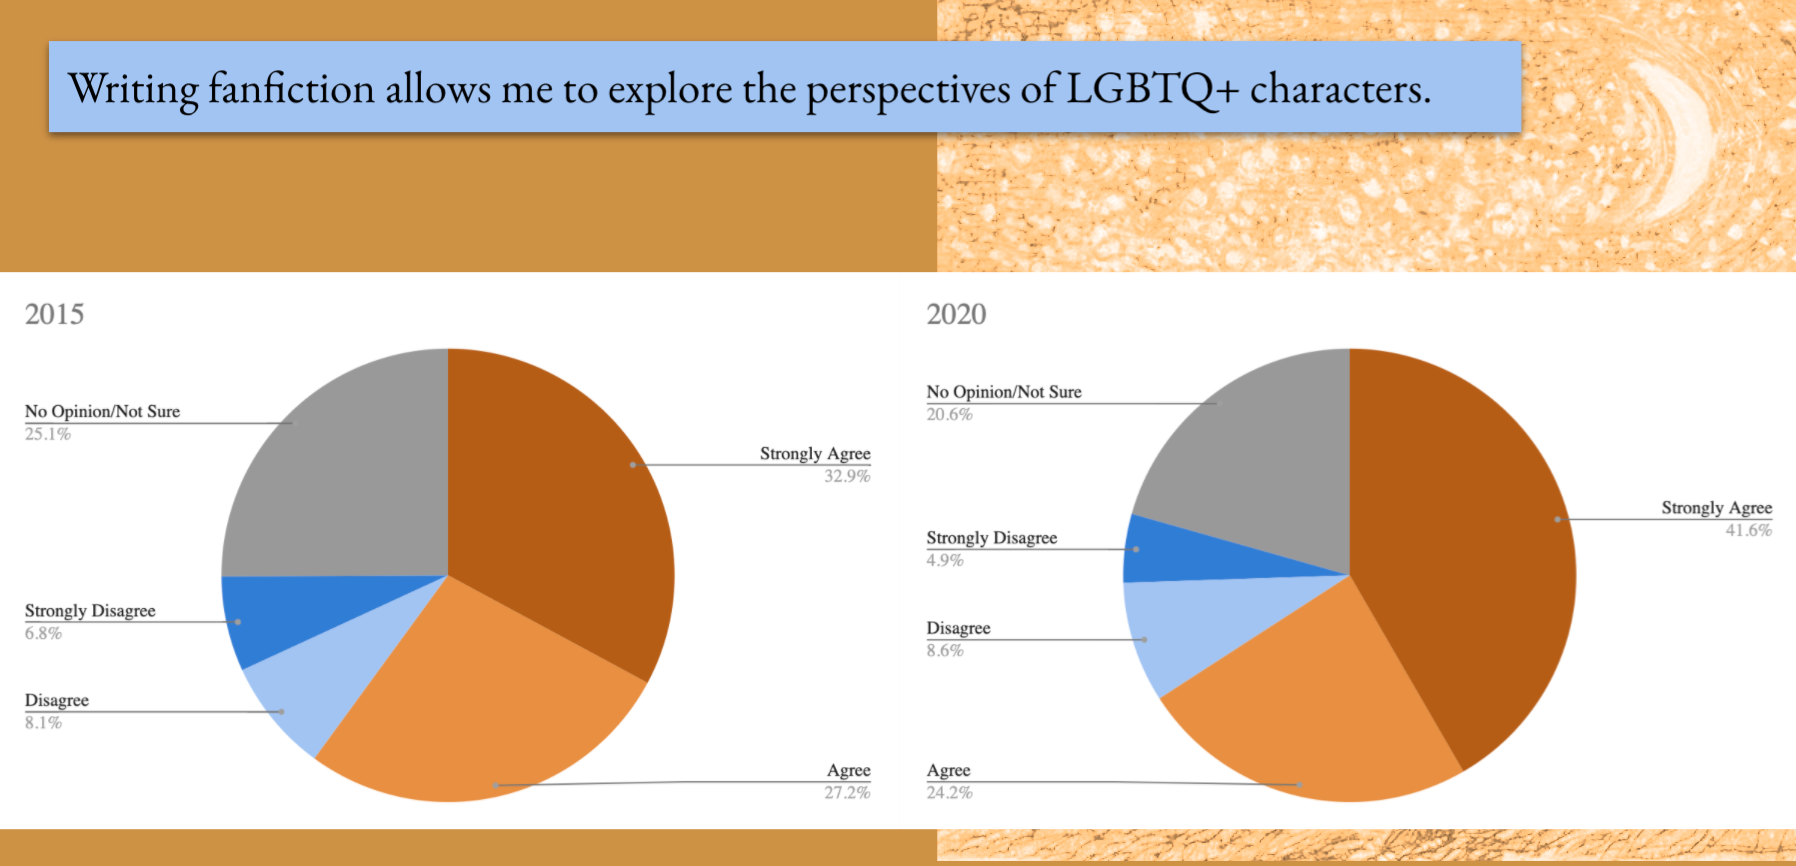 A majority of writers also agree that they use their fanfic to explore the perspectives of LGBTQ characters, with an increase from 2015 to 2020